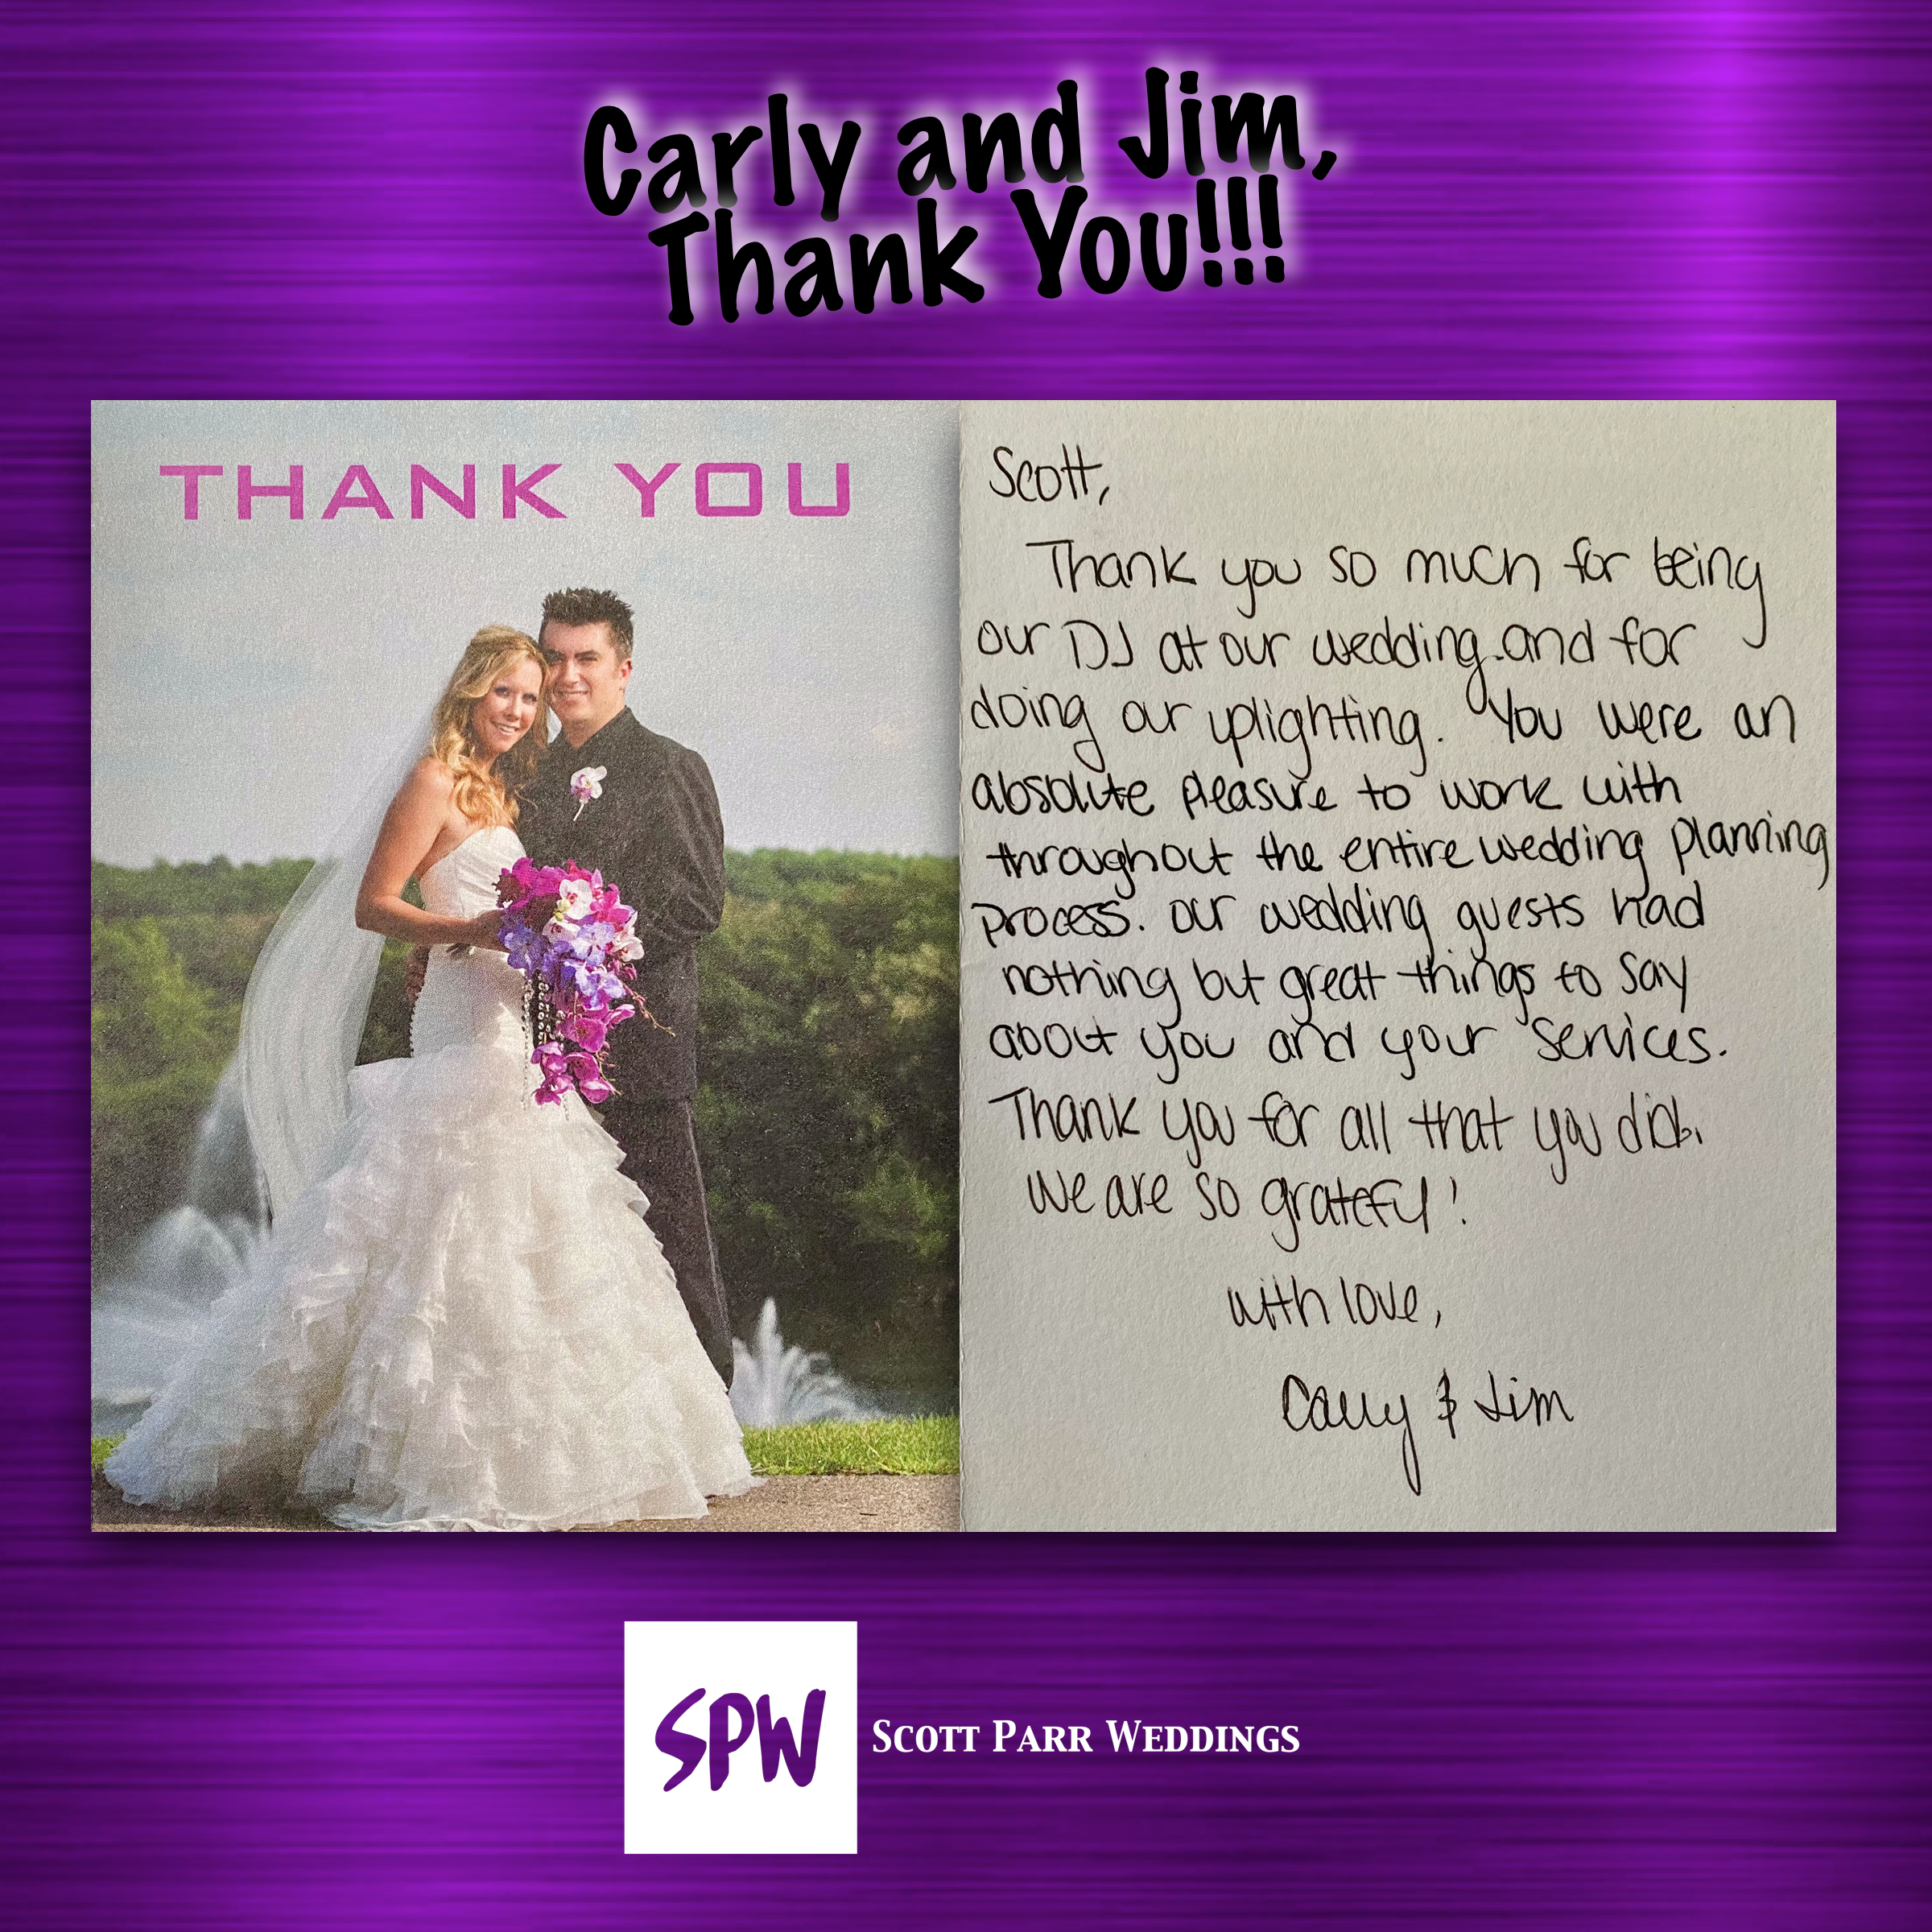 SPW - Thank You - Carly and Jim.png